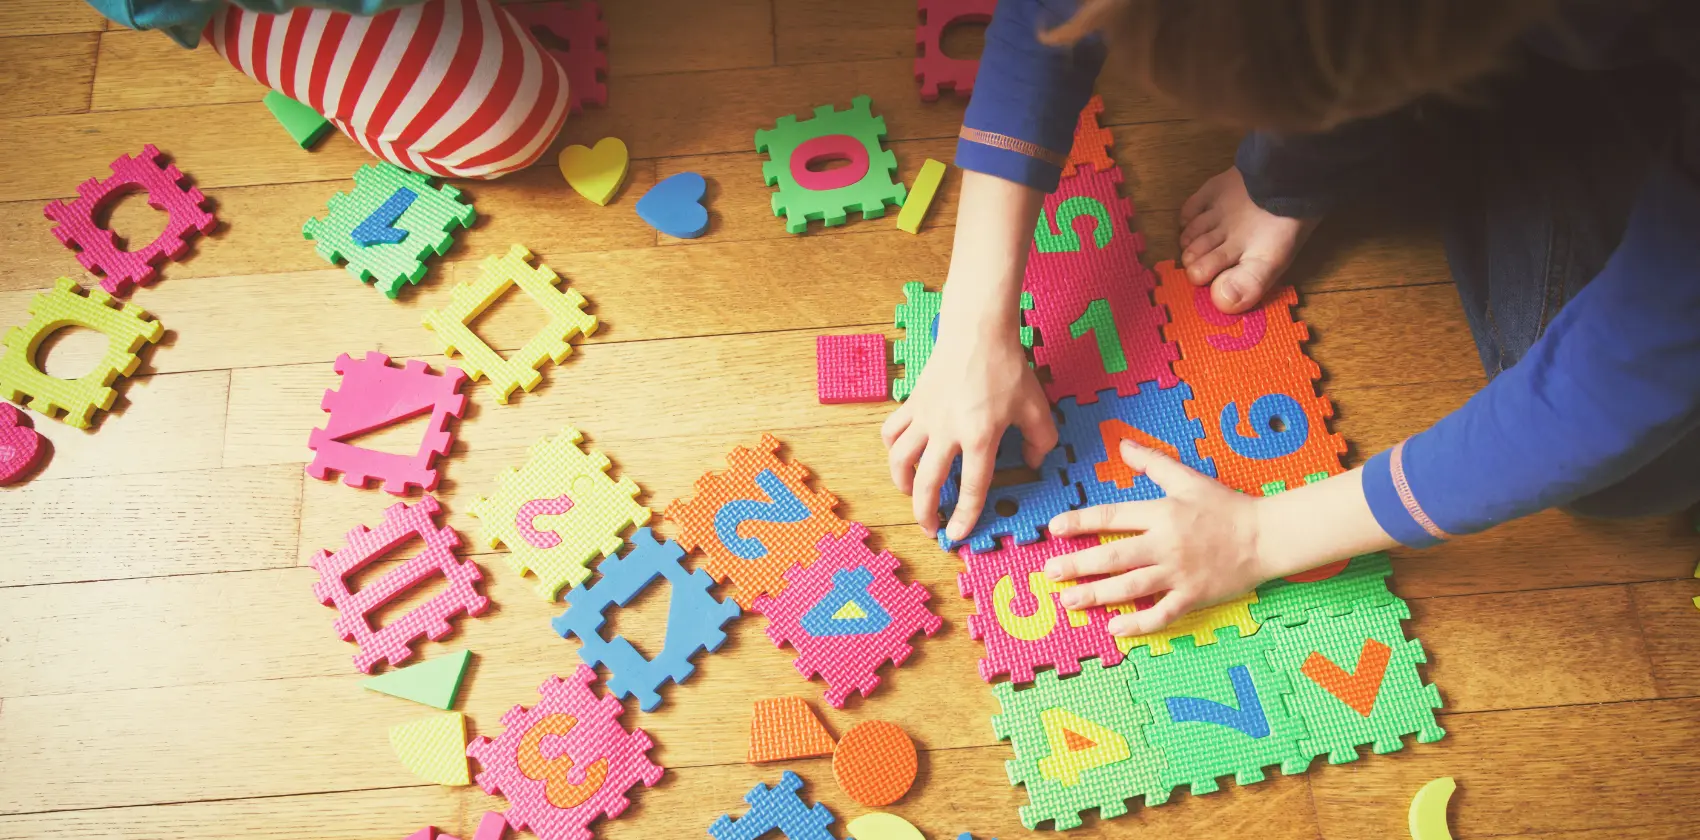 Two young children play with numbered blocks on a wooden floor